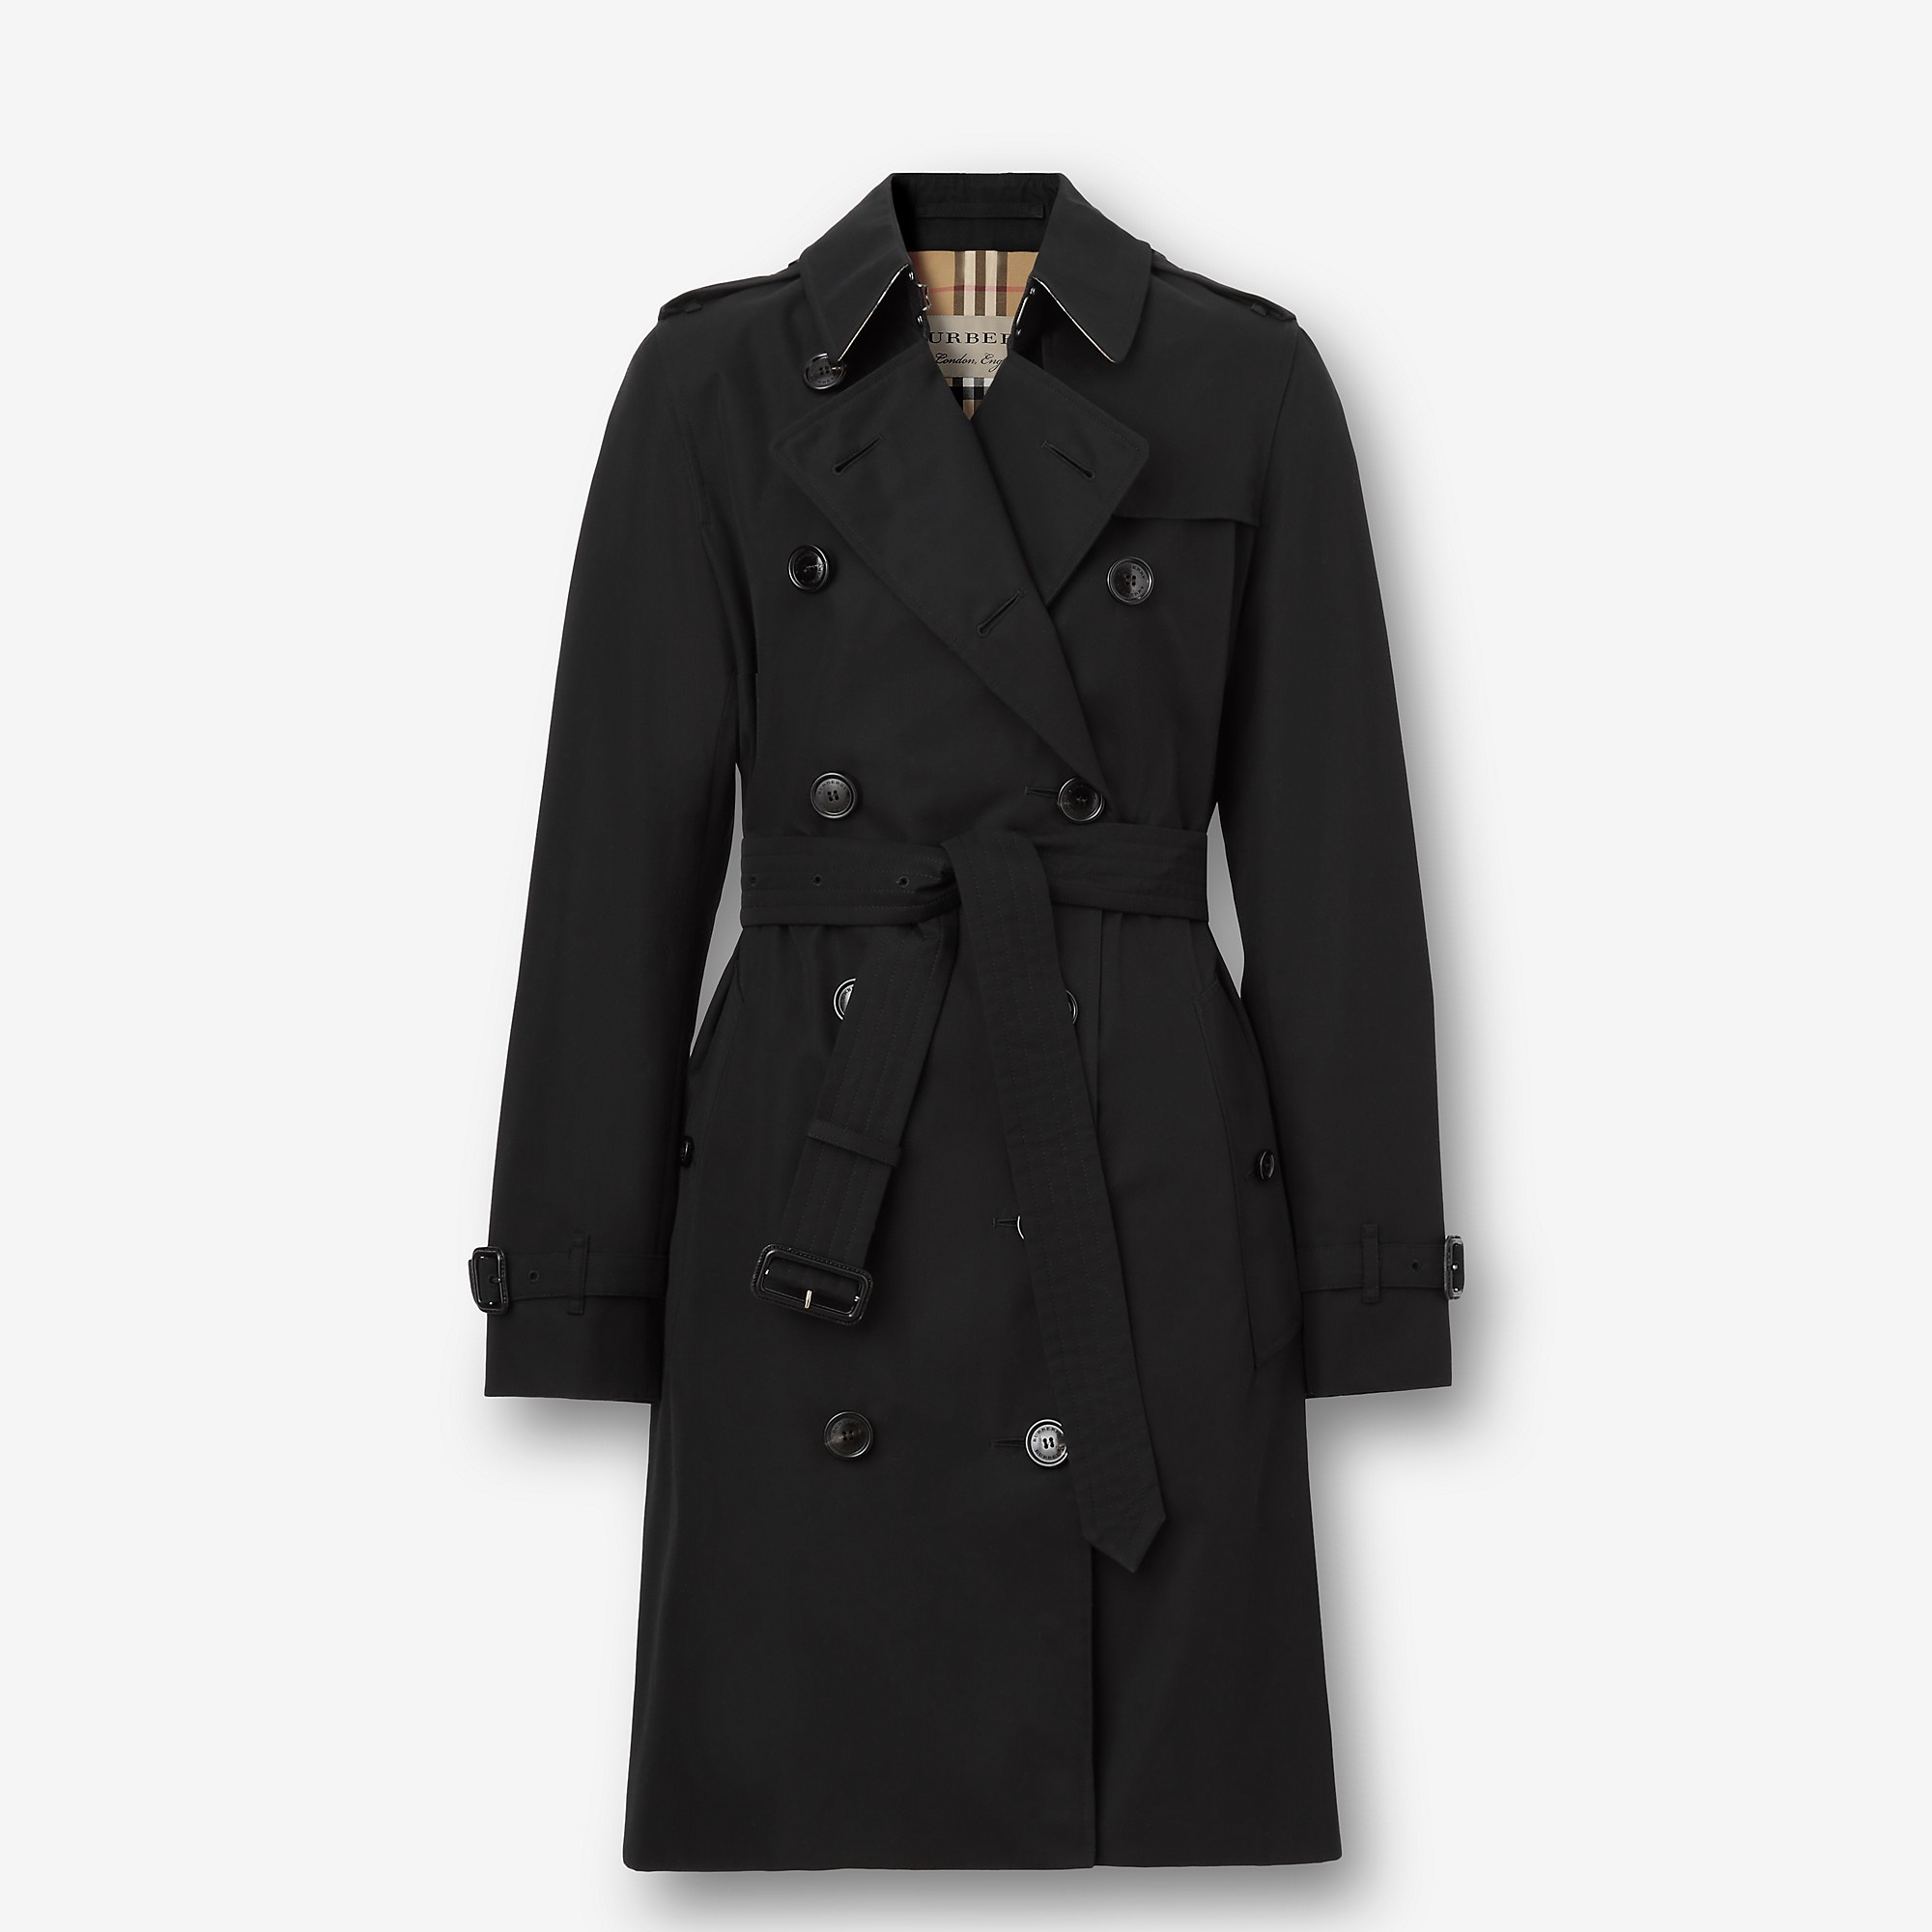 The Mid-length Kensington Heritage Trench Coat - 1